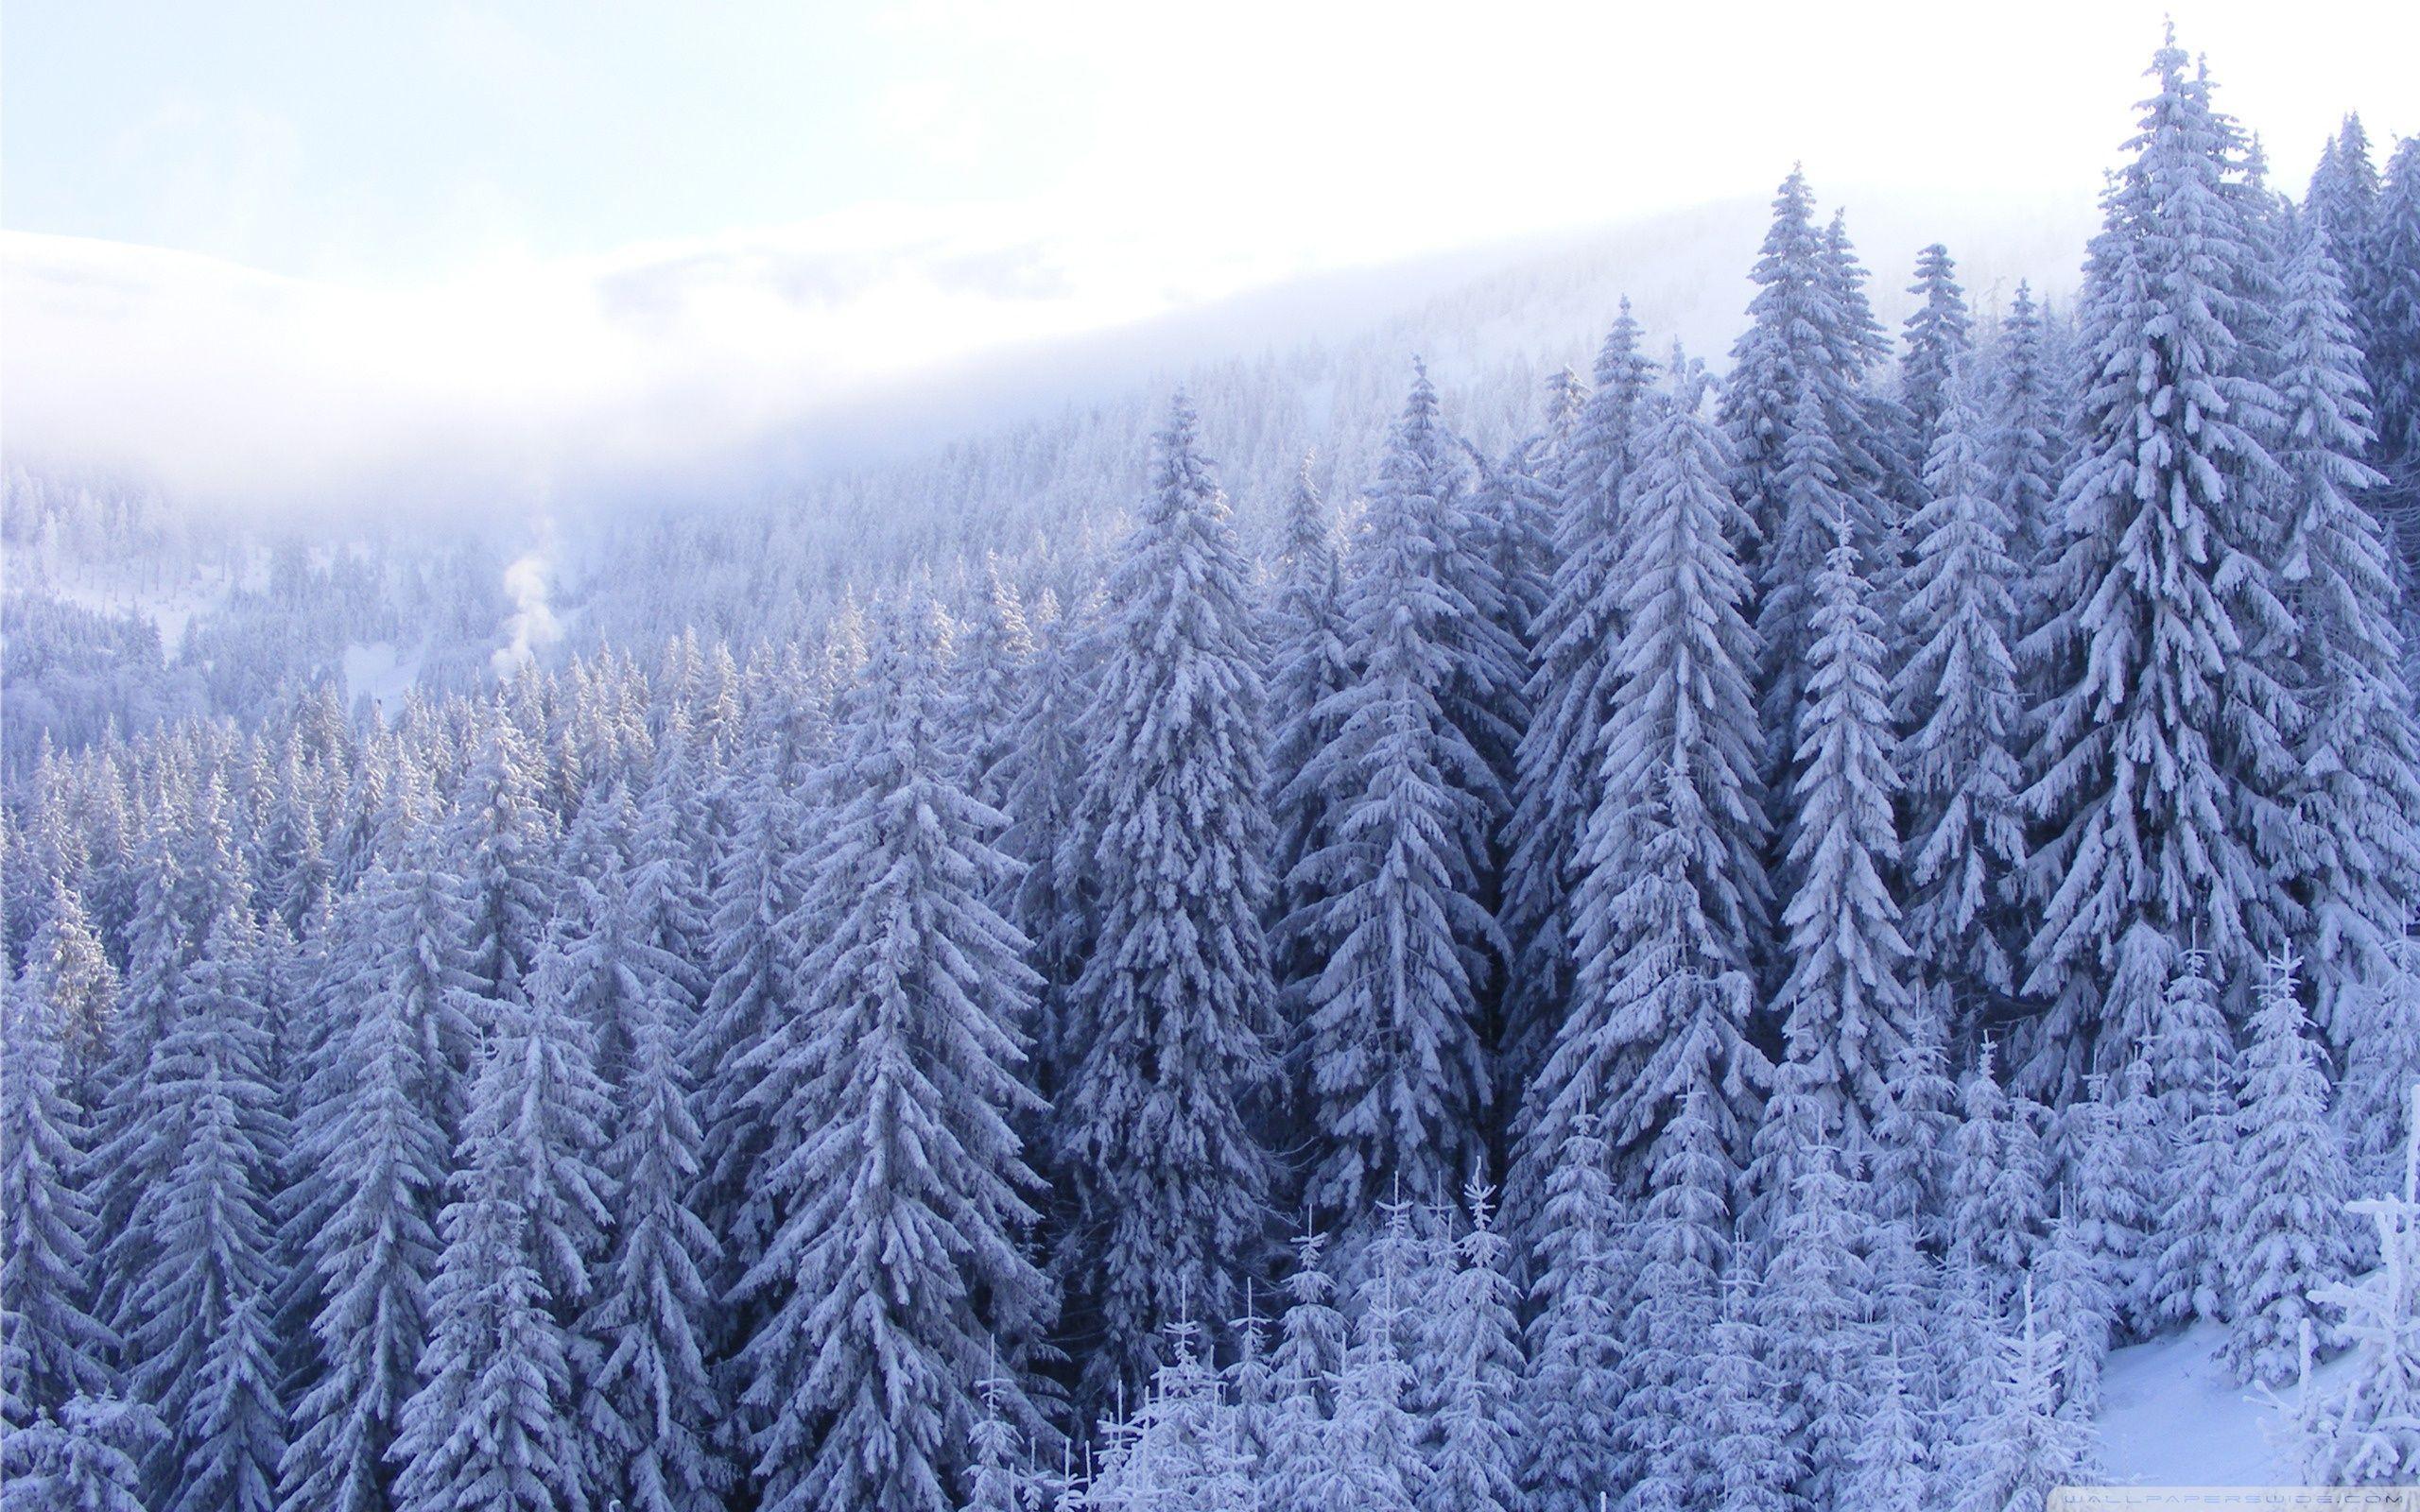 Stunning Snowy Pine Forest Wallpaper image For Free